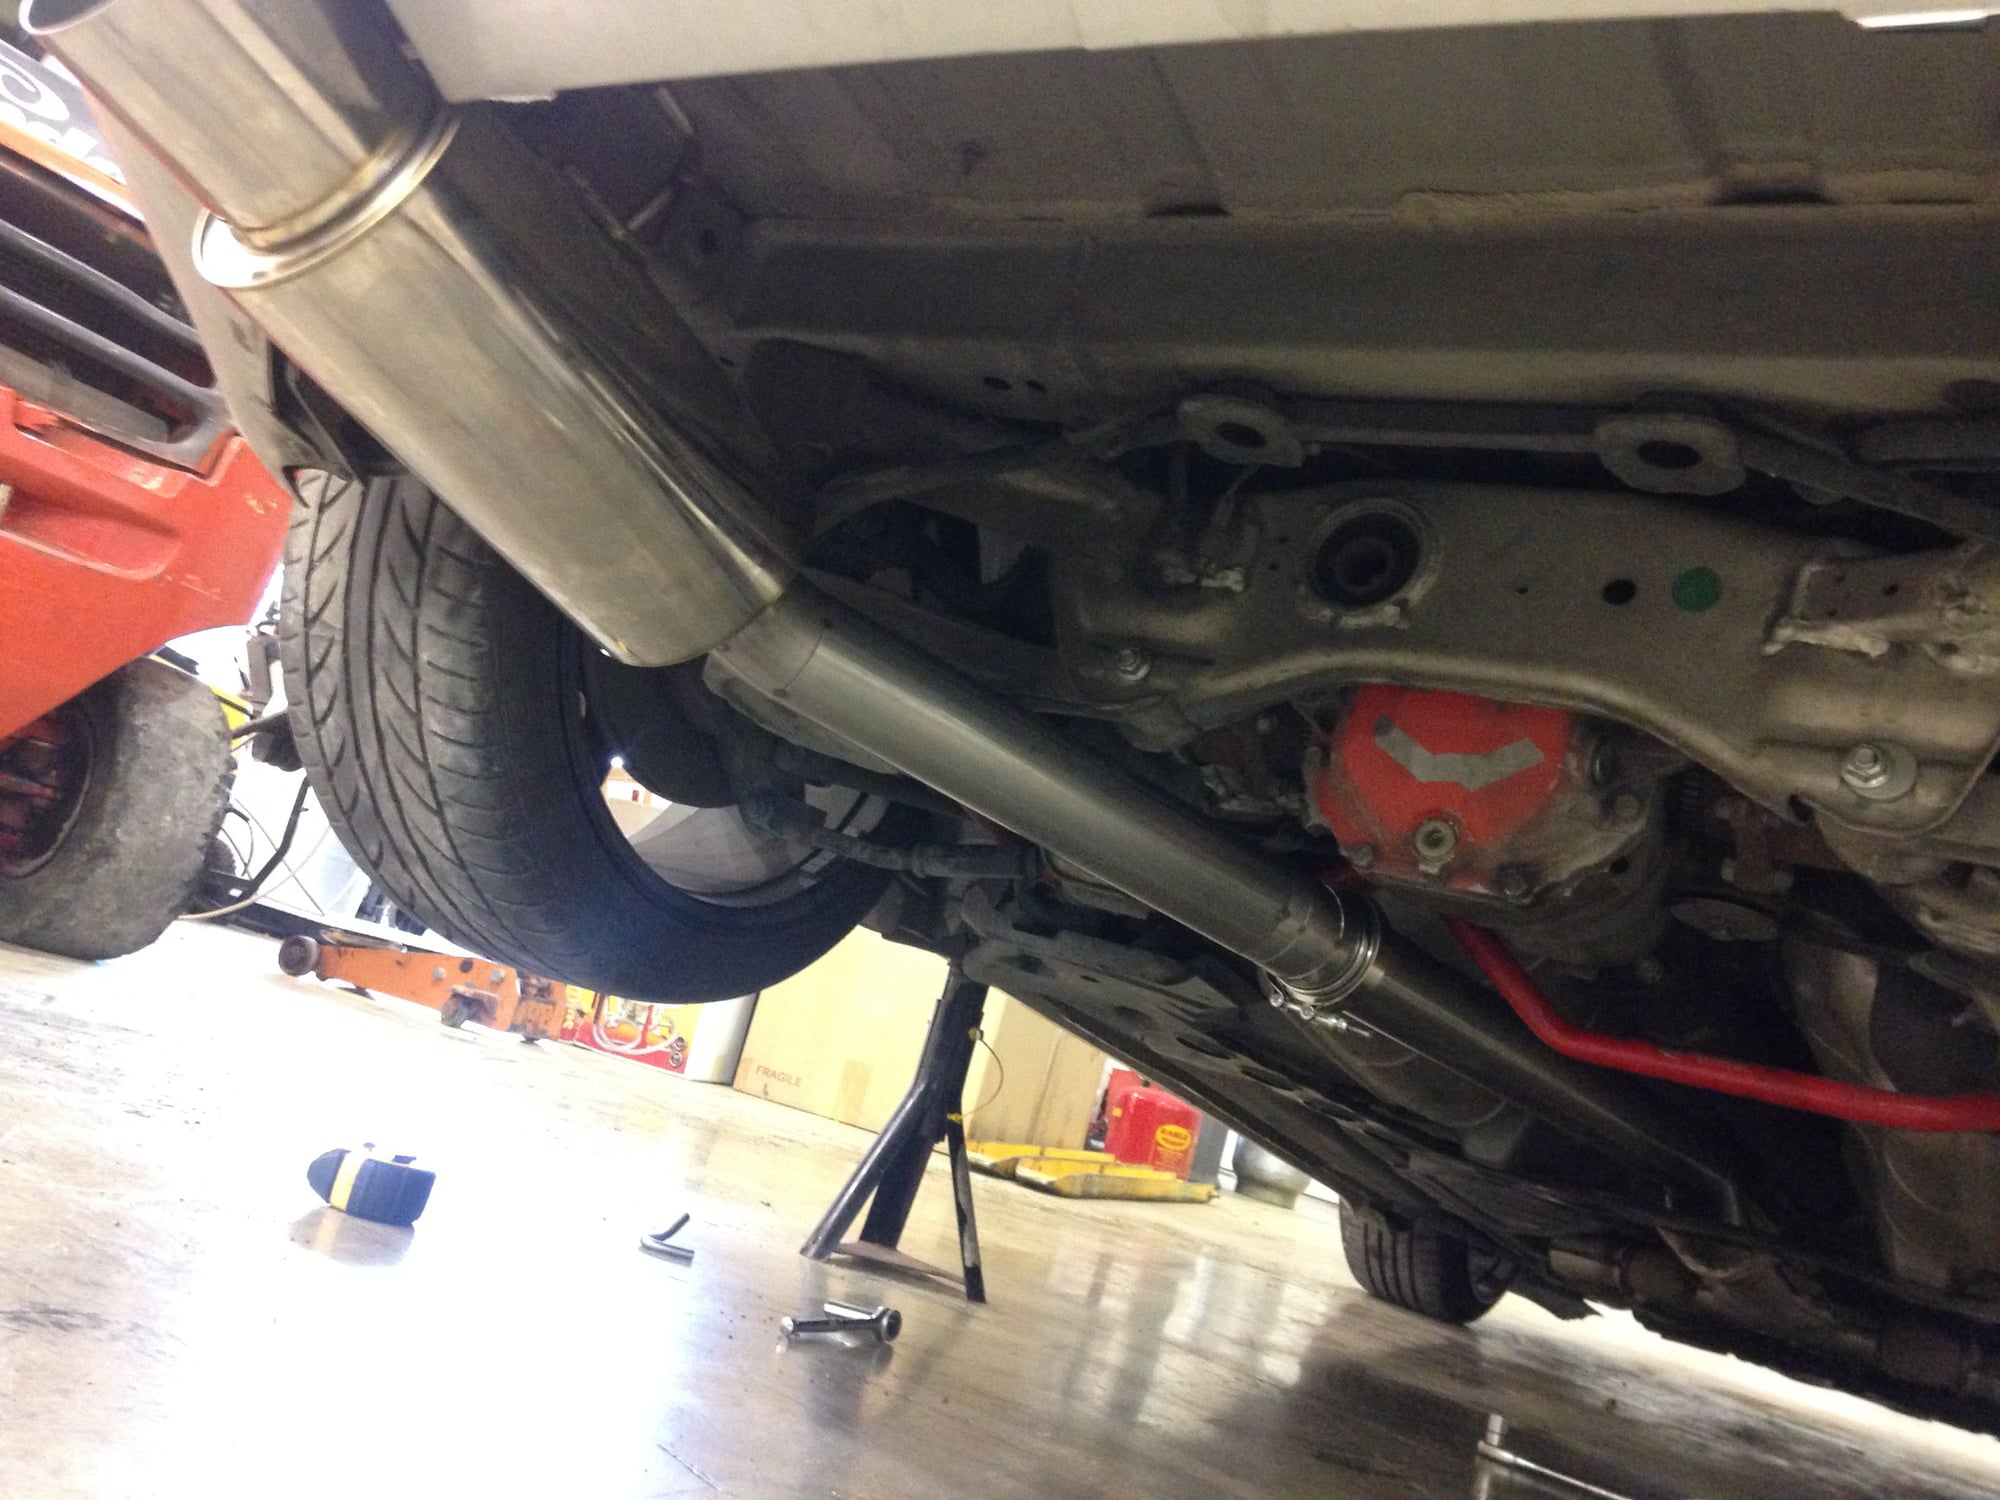 Exhaust Tip cleaning With Eagle One Nevr-Dull Wadding Polish -  -  Nissan 350Z and 370Z Forum Discussion